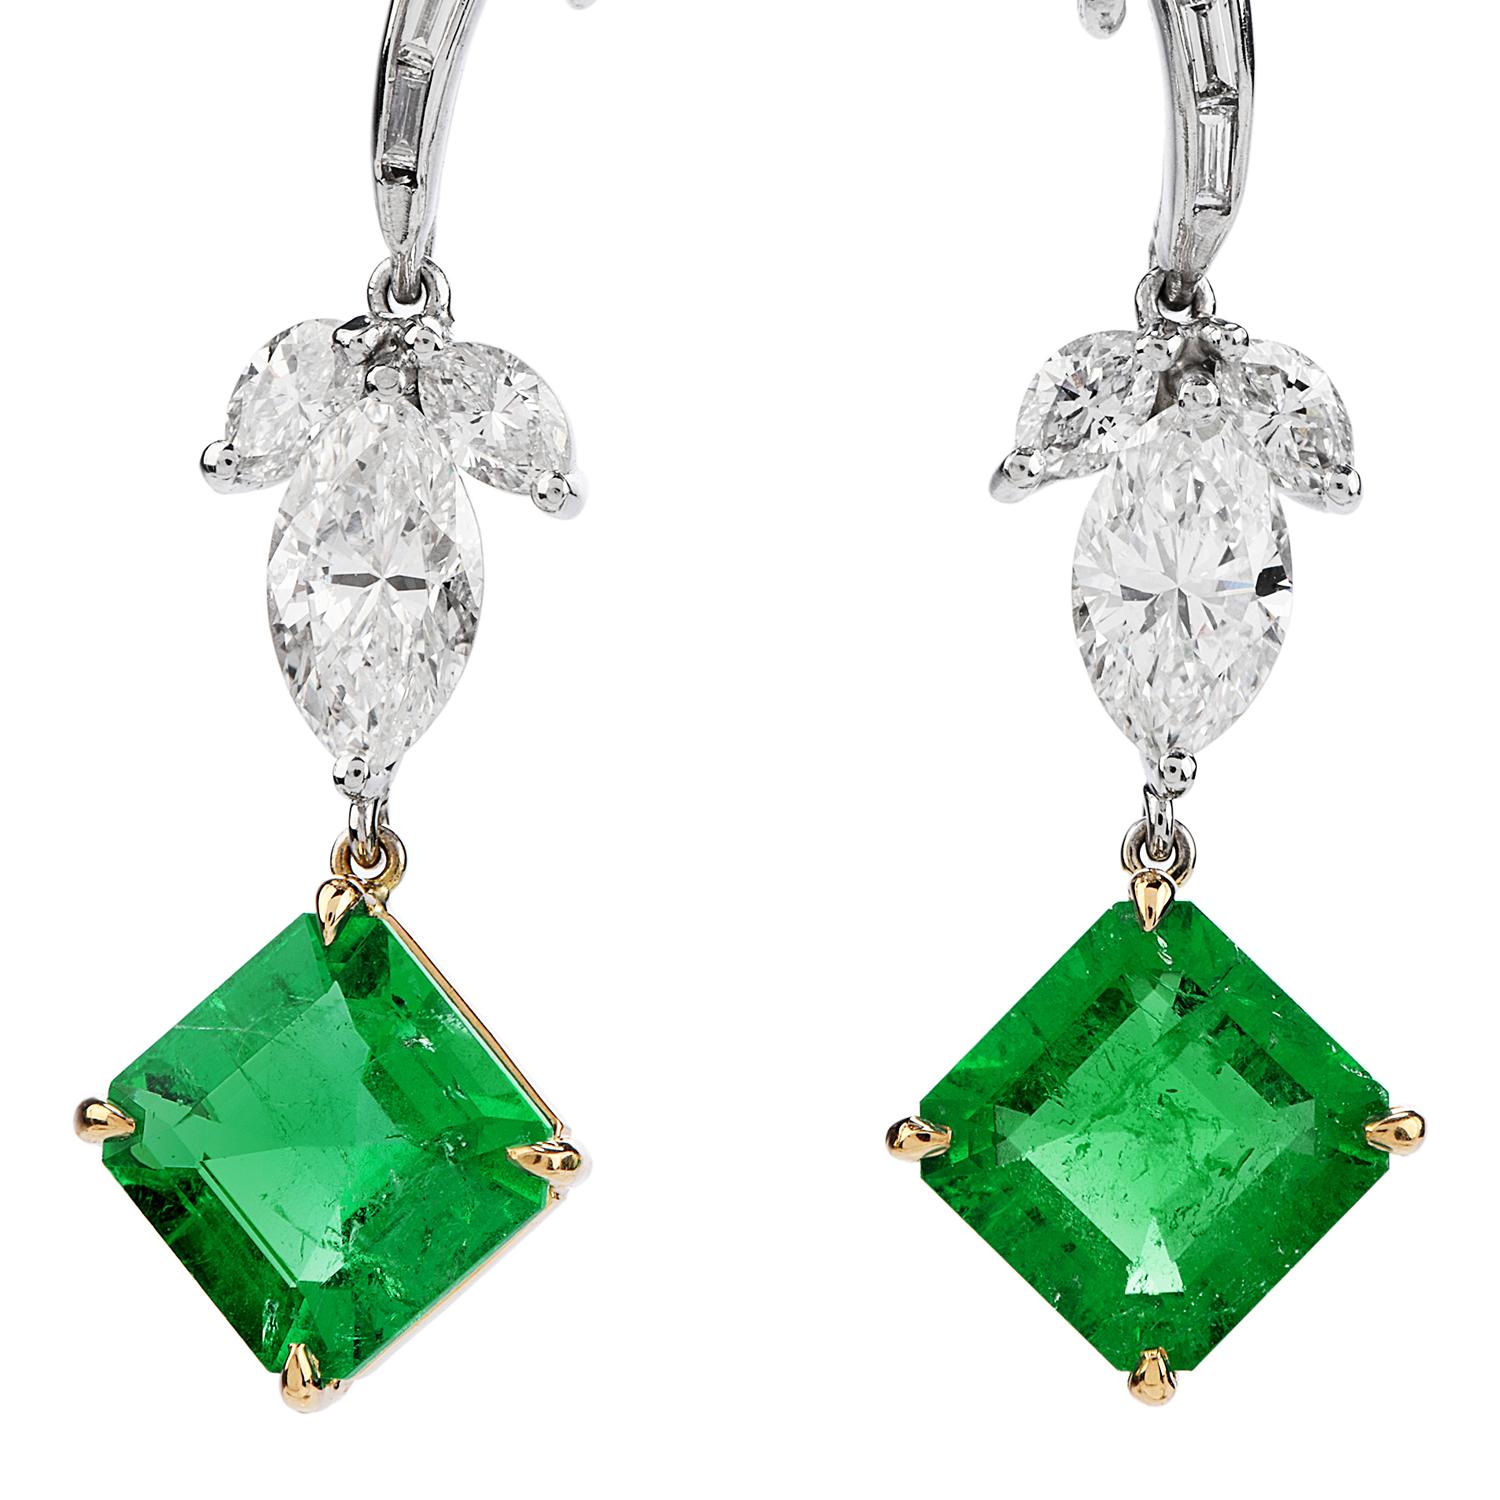 Feel especially beautiful at your next event with these vintage Diamond Colombian Emerald 18K Gold Drop Earrings

This vintage late 1950’s Diamond Colombian Emerald 18K Gold Drop  Earrings! 

These dangle drop earrings are crafted in platinum with